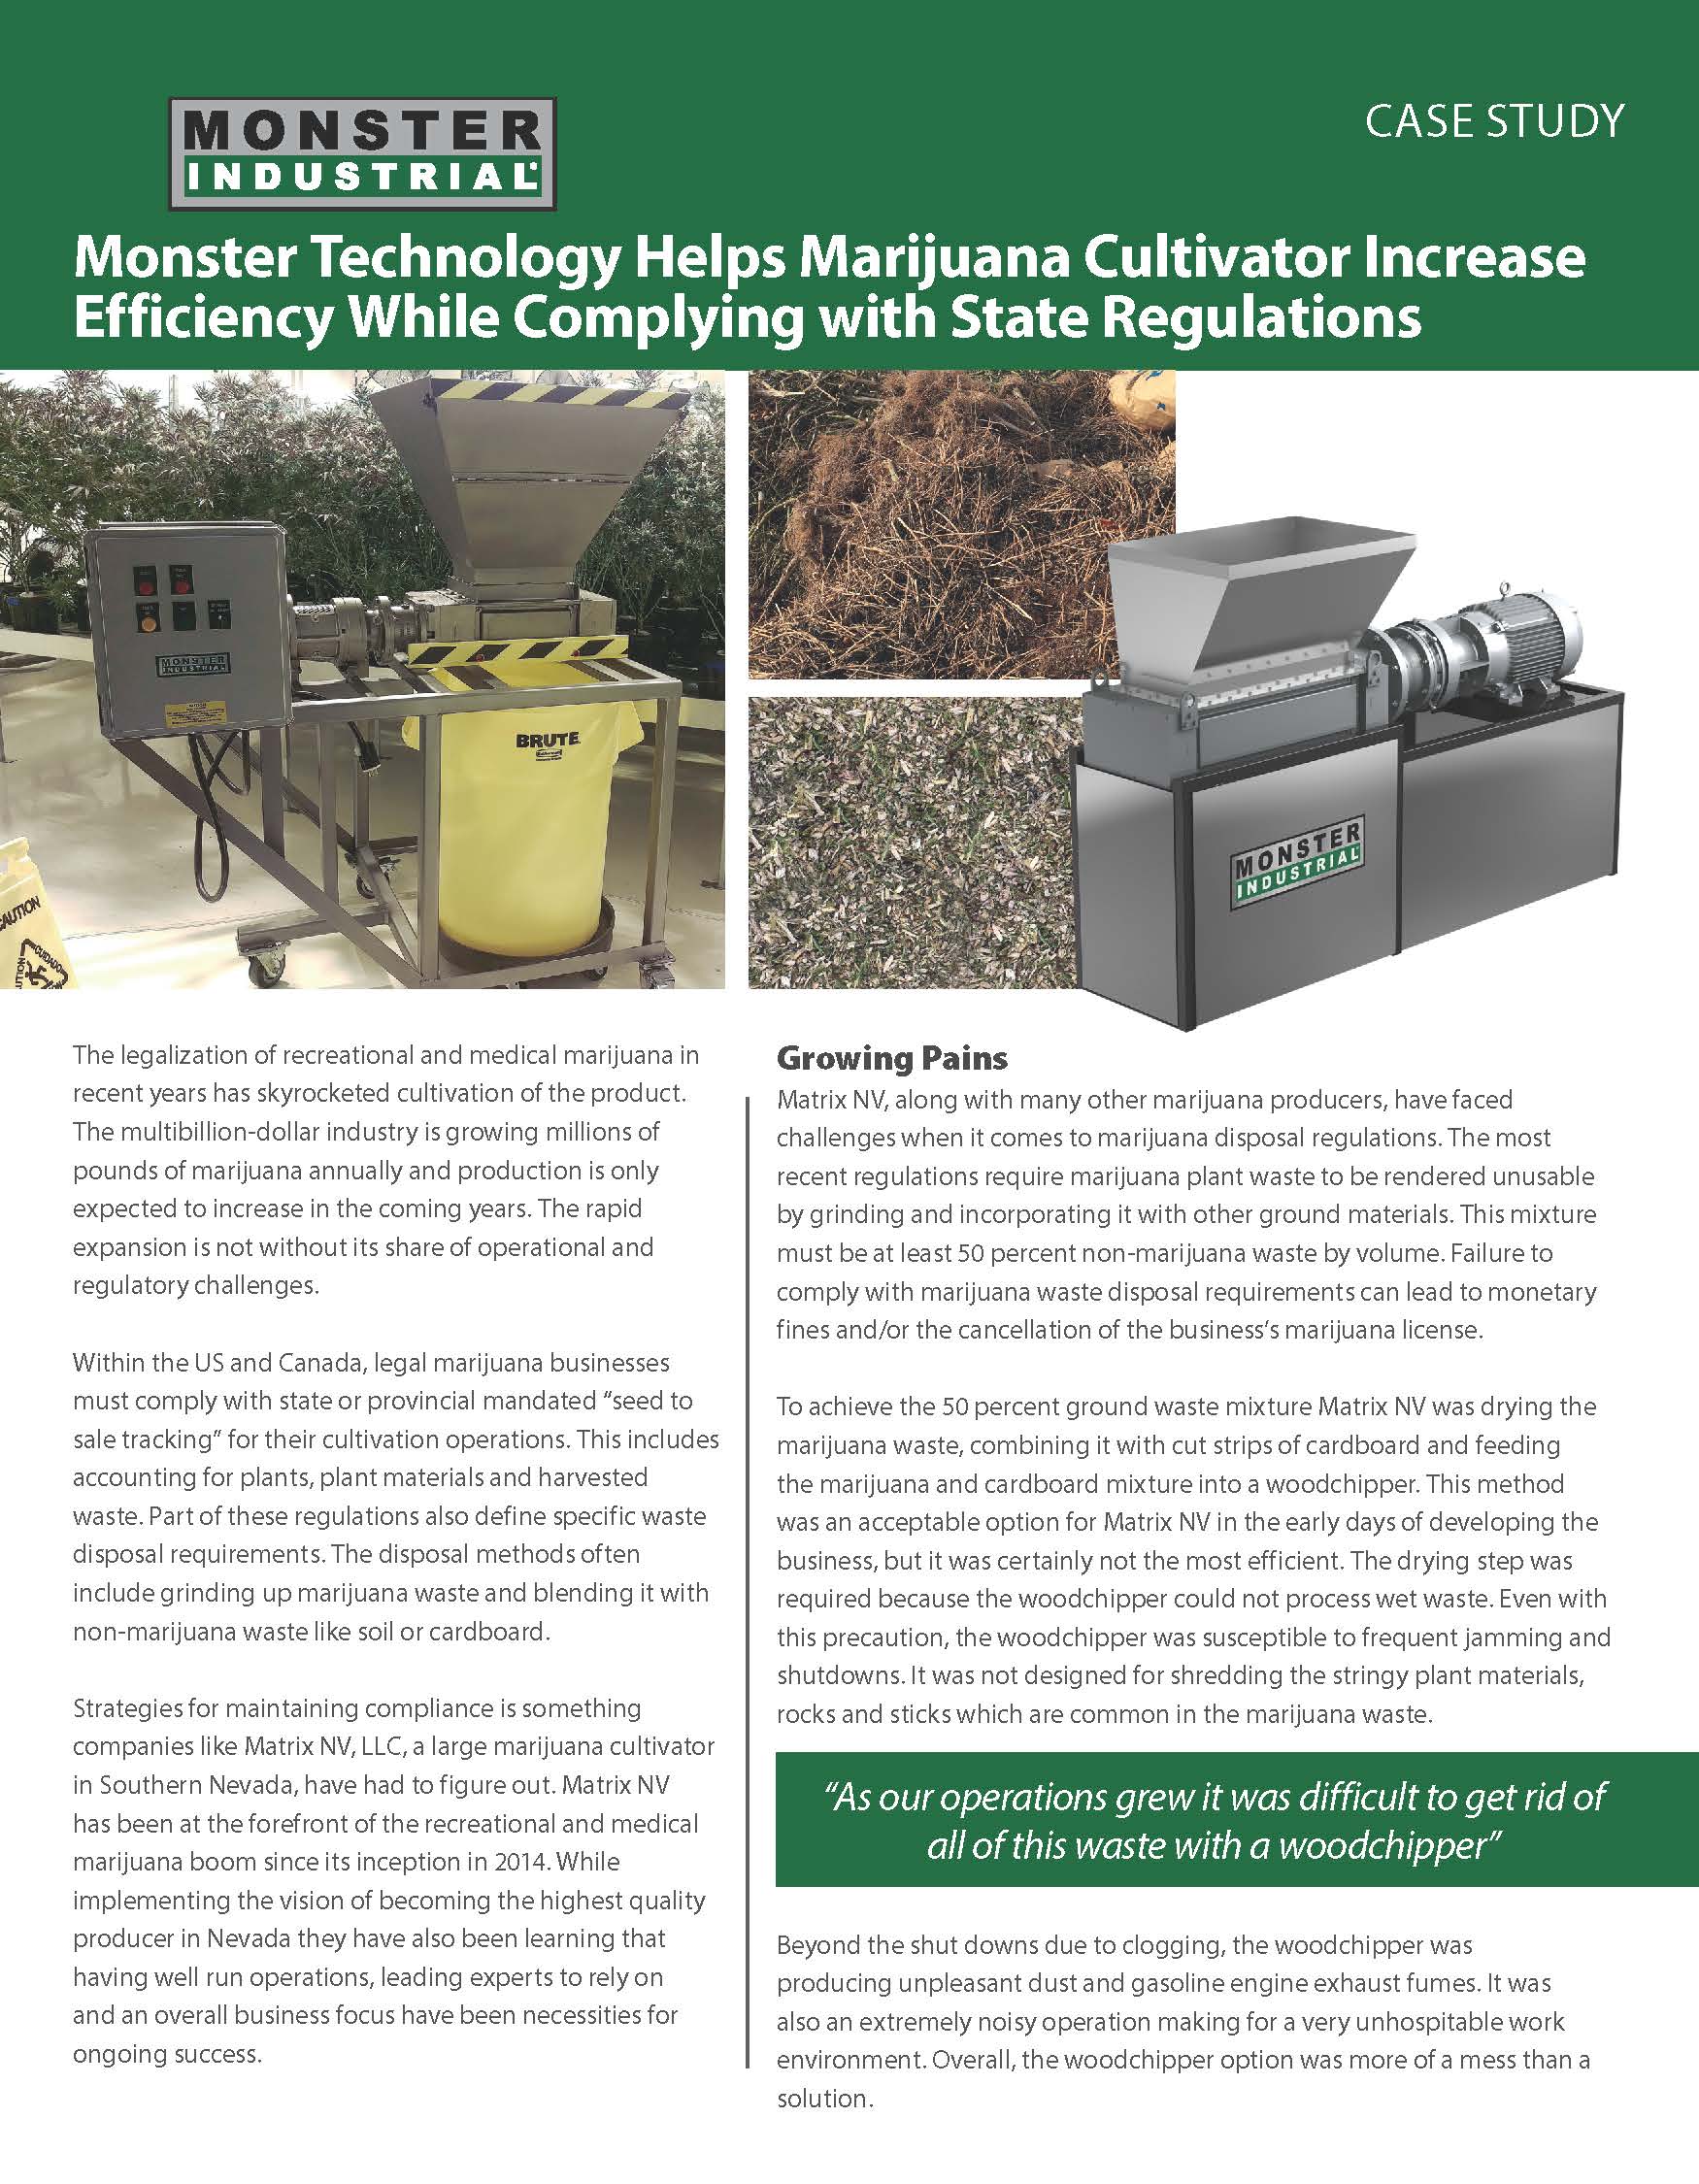 Case Study: Monster Technology Helps Marijuana Cultivator Increase Efficiency While Complying with State Regulations